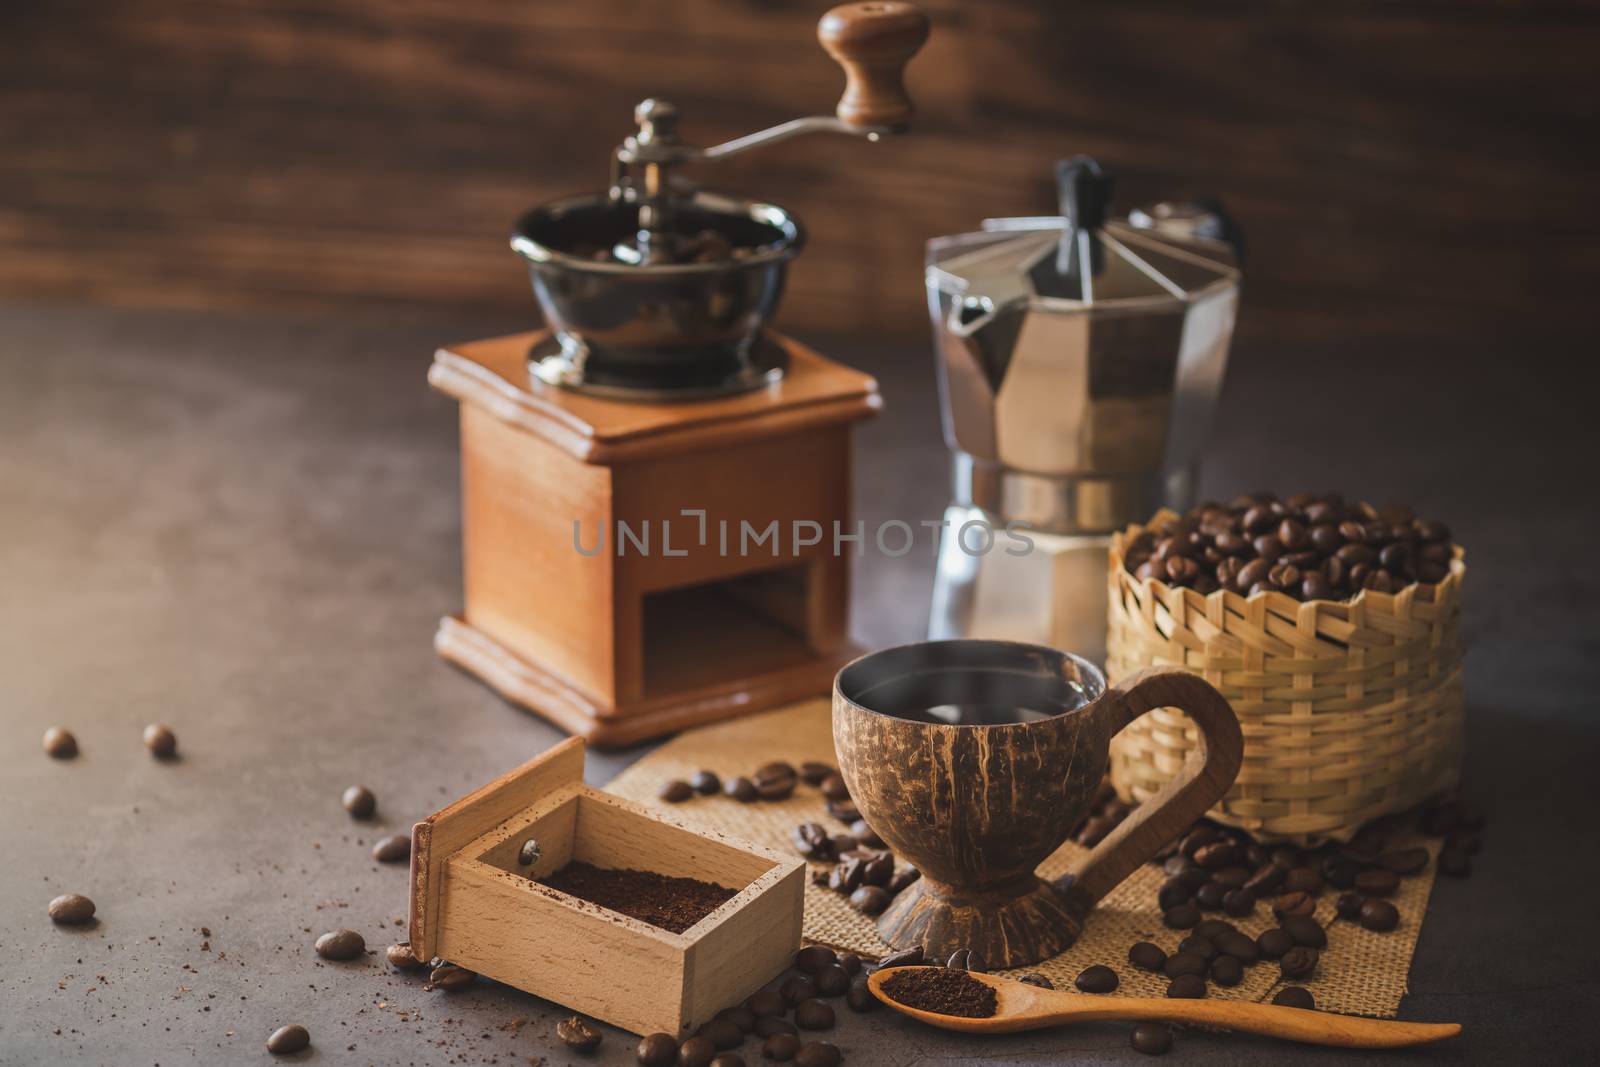 Brew black coffee in coconut cup and morning lighting. Roasted coffee beans in a bamboo basket and wooden spoon. Vintage coffee grinder and moka pot. Concept of coffee time in morning or start the new day.